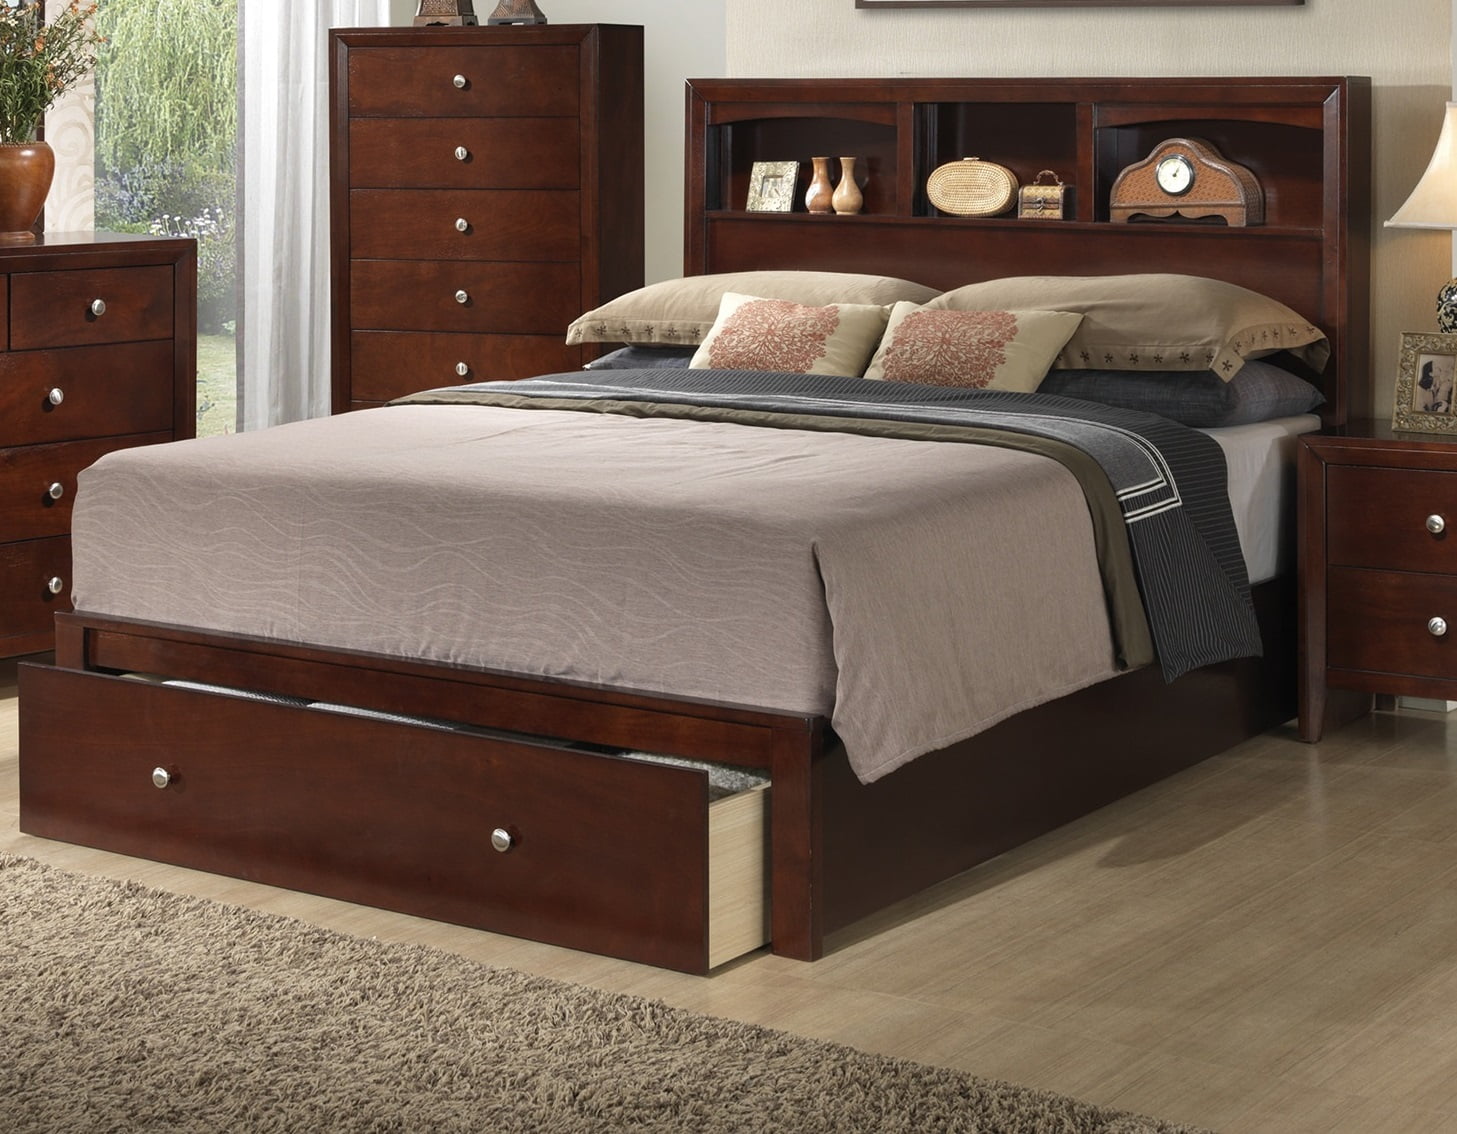 Bedroom Furniture 1pc California King, King Size Bed With Drawers